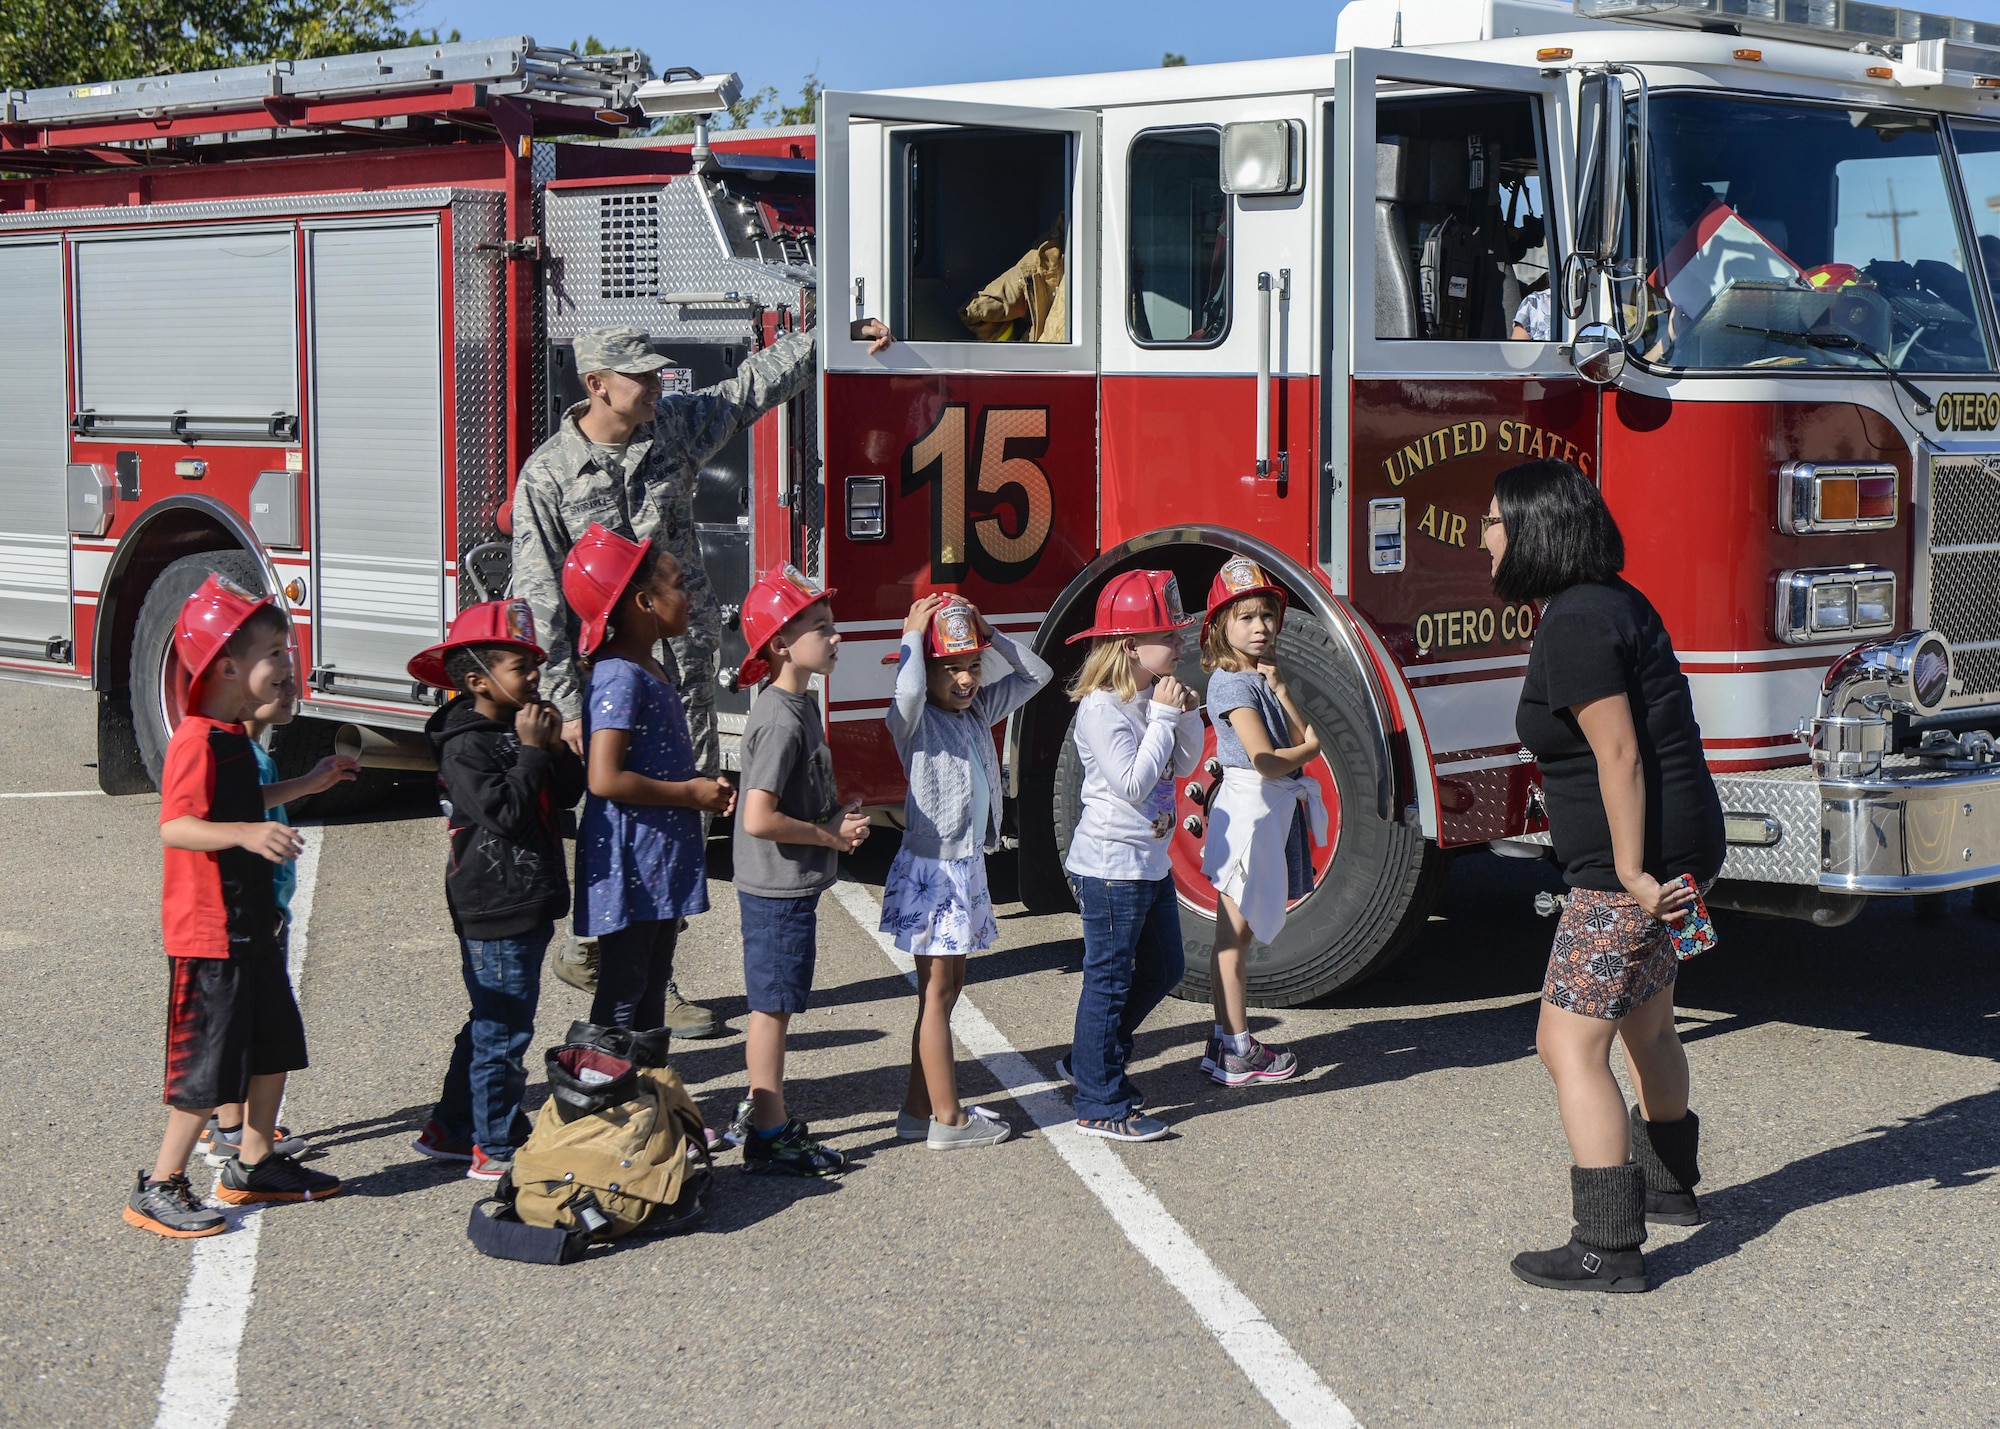 A group of children take turns exploring a fire truck at Holloman Air Force Base’s elementary school as part of the base’s annual Fire Prevention Week, Oct. 14, 2016 at Holloman AFB, N.M. Holloman AFB firefighters visited the base’s elementary and middle schools throughout the week, to teach students about the importance of practicing fire safety. (U.S. Air Force photo by Airman 1st Class Alexis P. Docherty) 